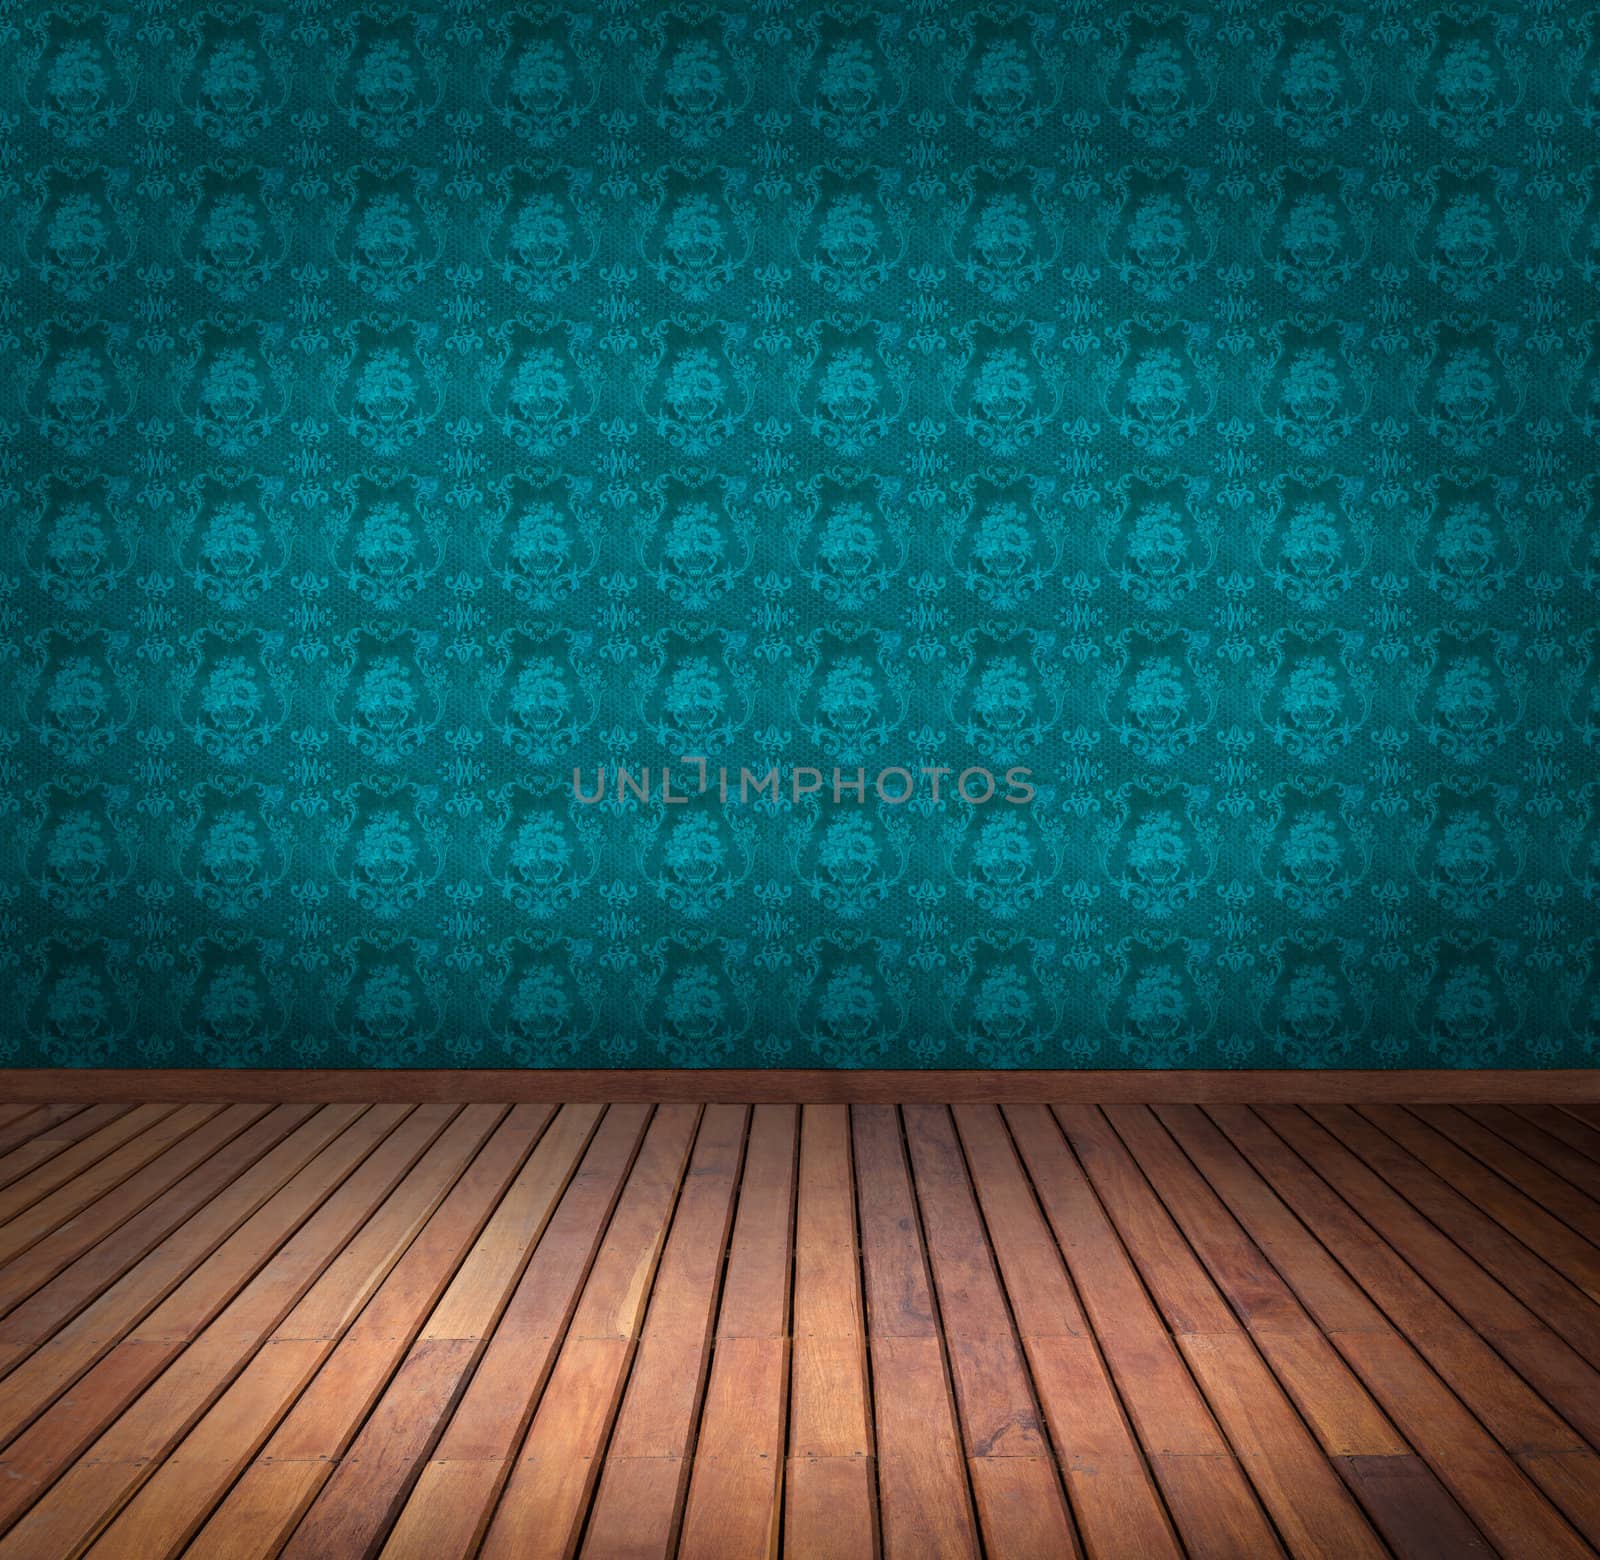 blue wallpaper room by tungphoto